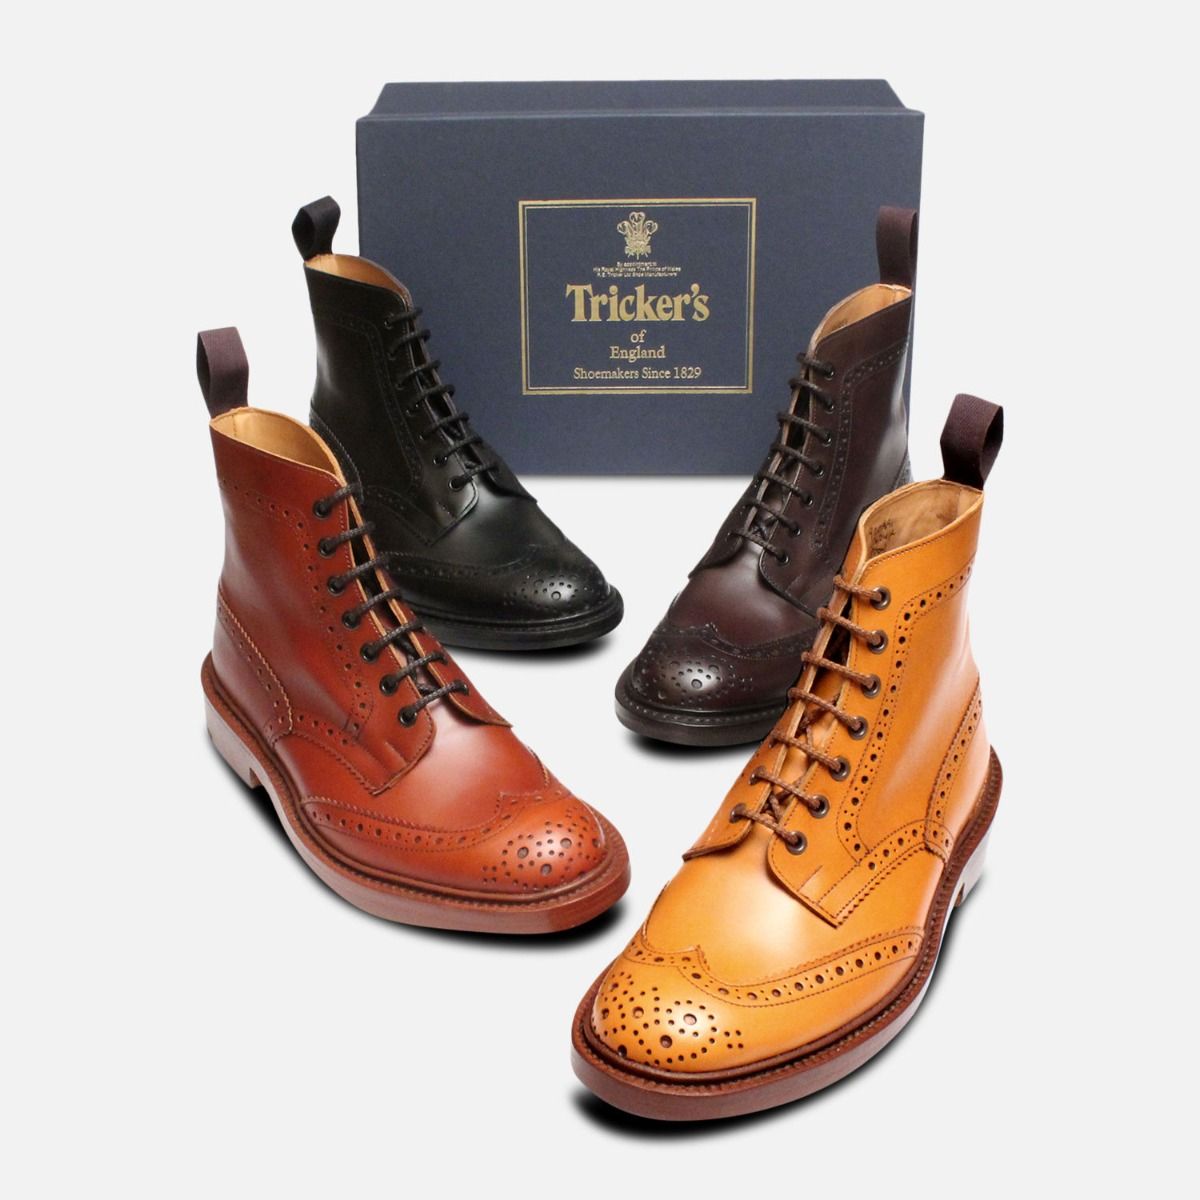 Trickers Stow Black Dainite Brogue Boots